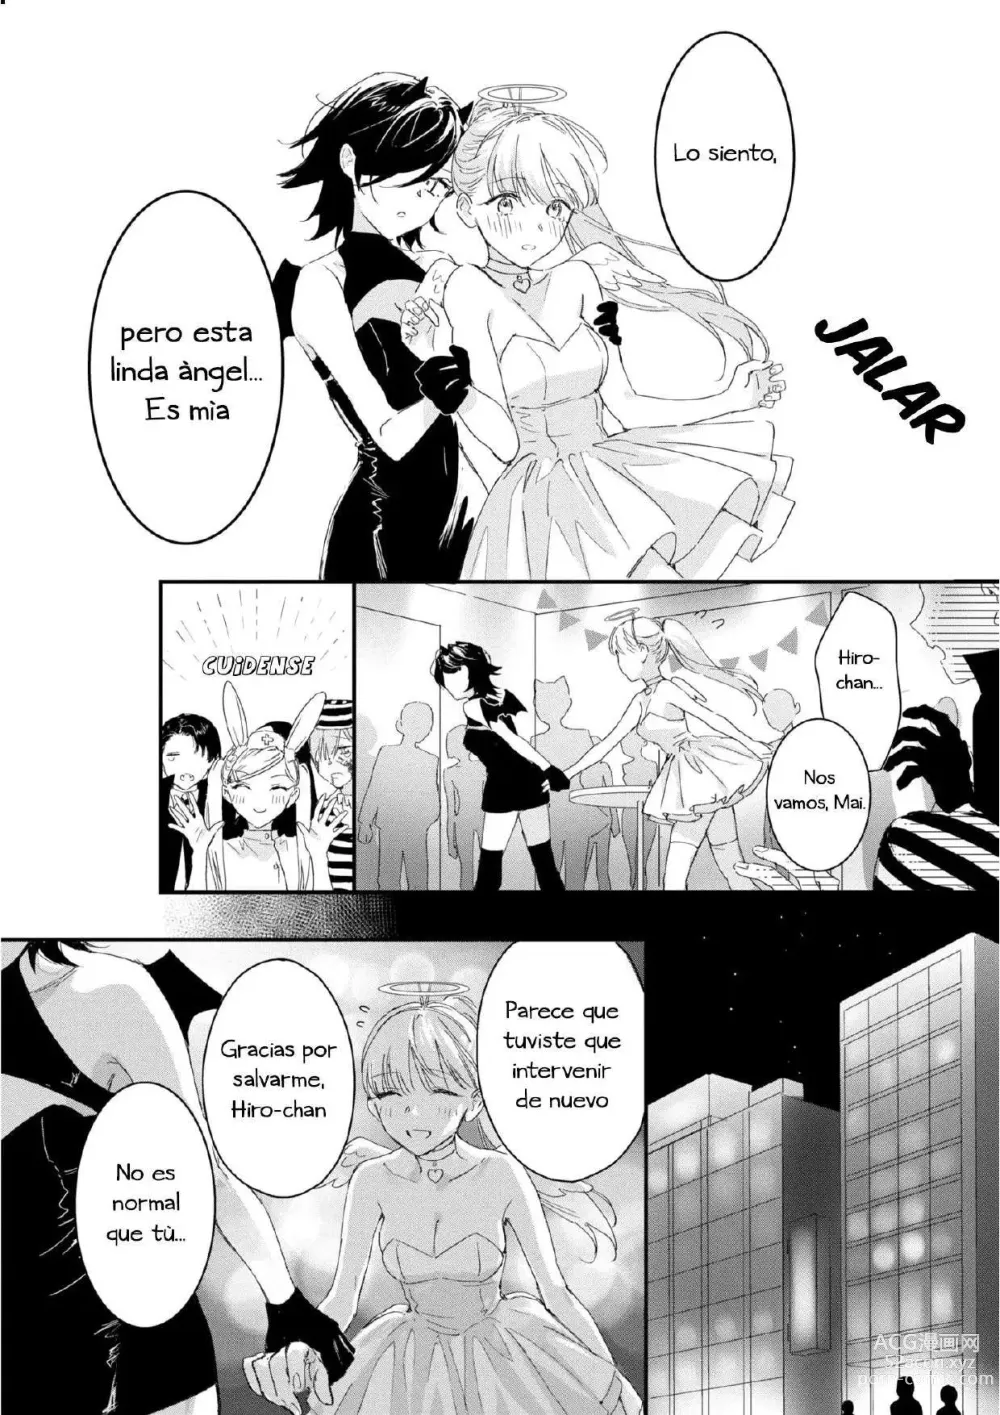 Page 6 of manga A Little Angel's Temptation